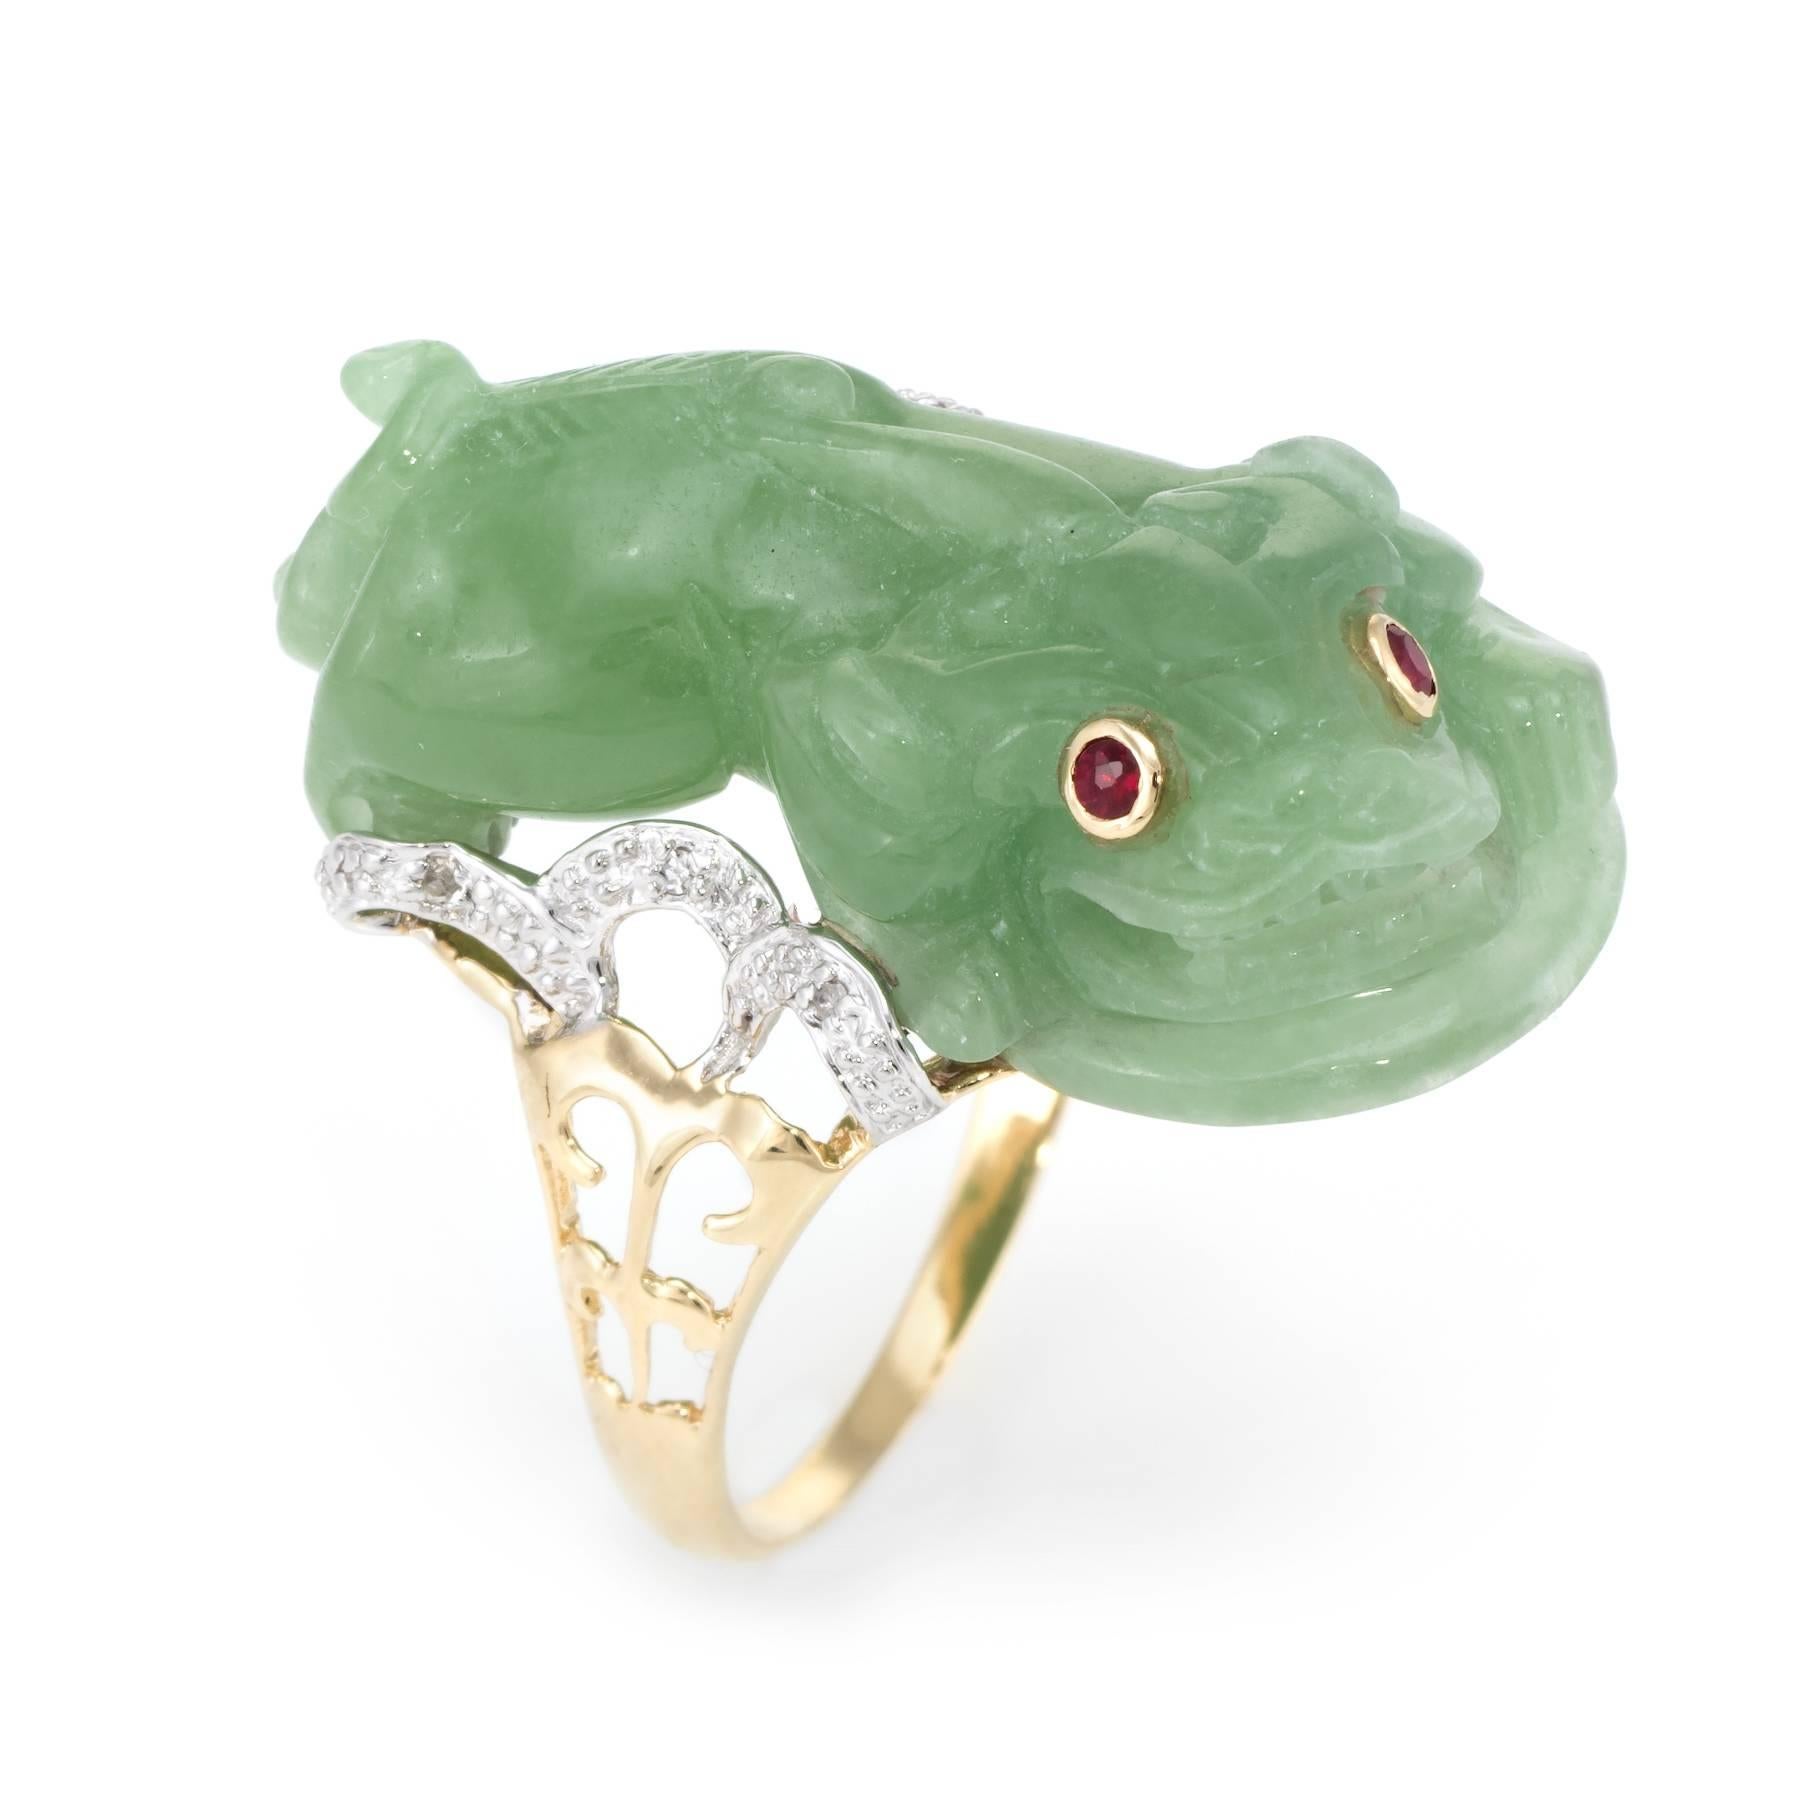 Finely detailed vintage cocktail ring, crafted in 14 karat yellow gold. 

A dragon koi fish is carved in jade, set with ruby eyes (estimated at 0.02 carats each). The jade measures 31mm x 14mm. The jade is in excellent condition and free of cracks